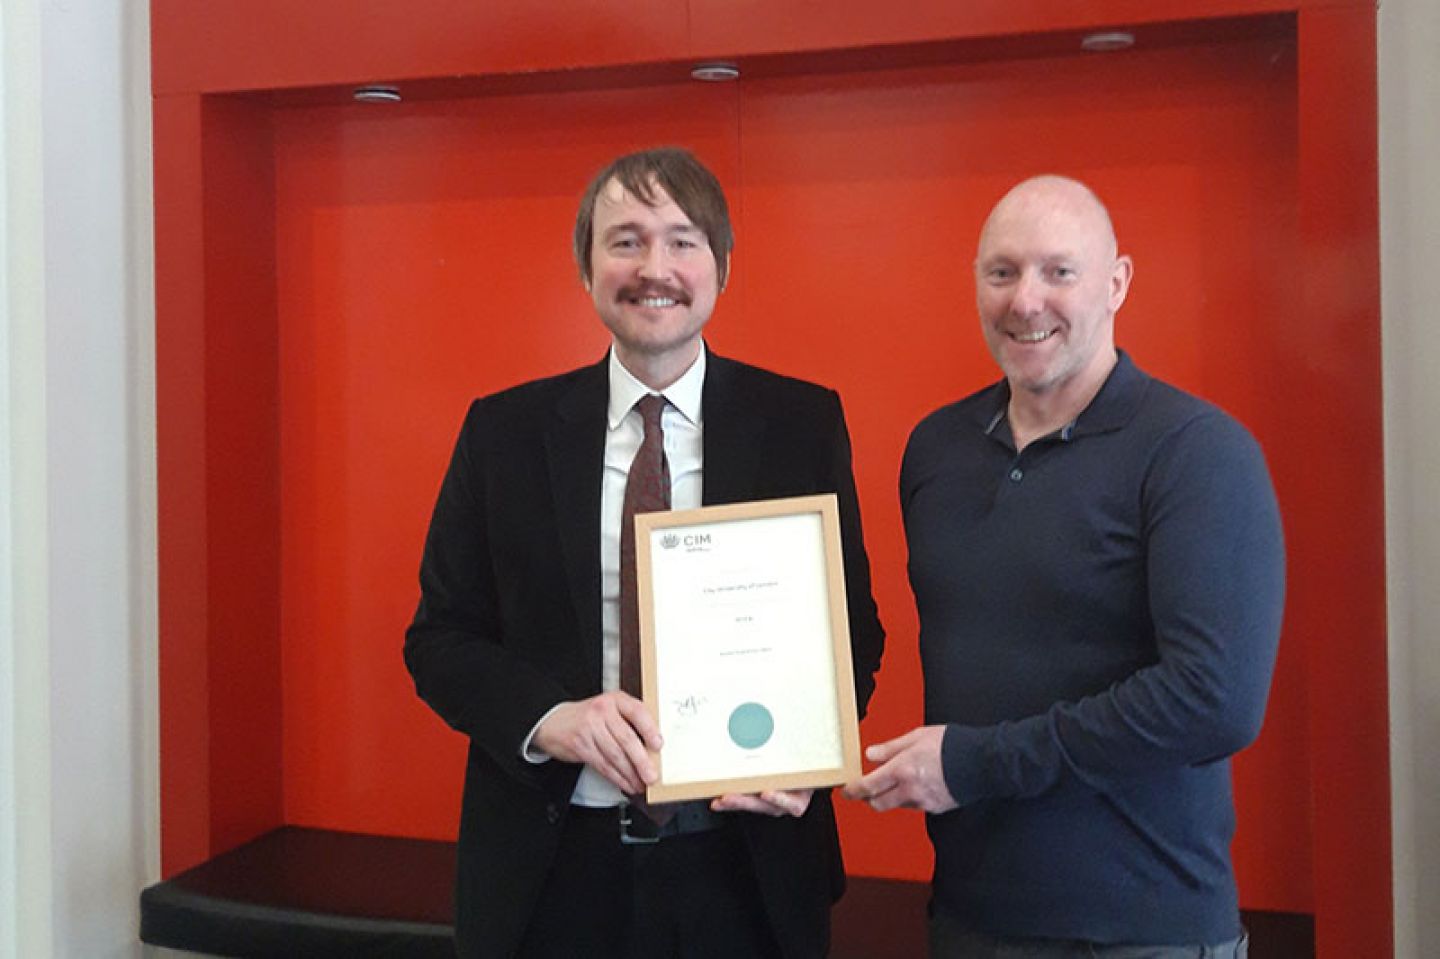 Professor Mattias Frey (left) holds a white certificate handed to him by CIM rep Damian Cuke (right). They stand against a red backrdrop on campus at City